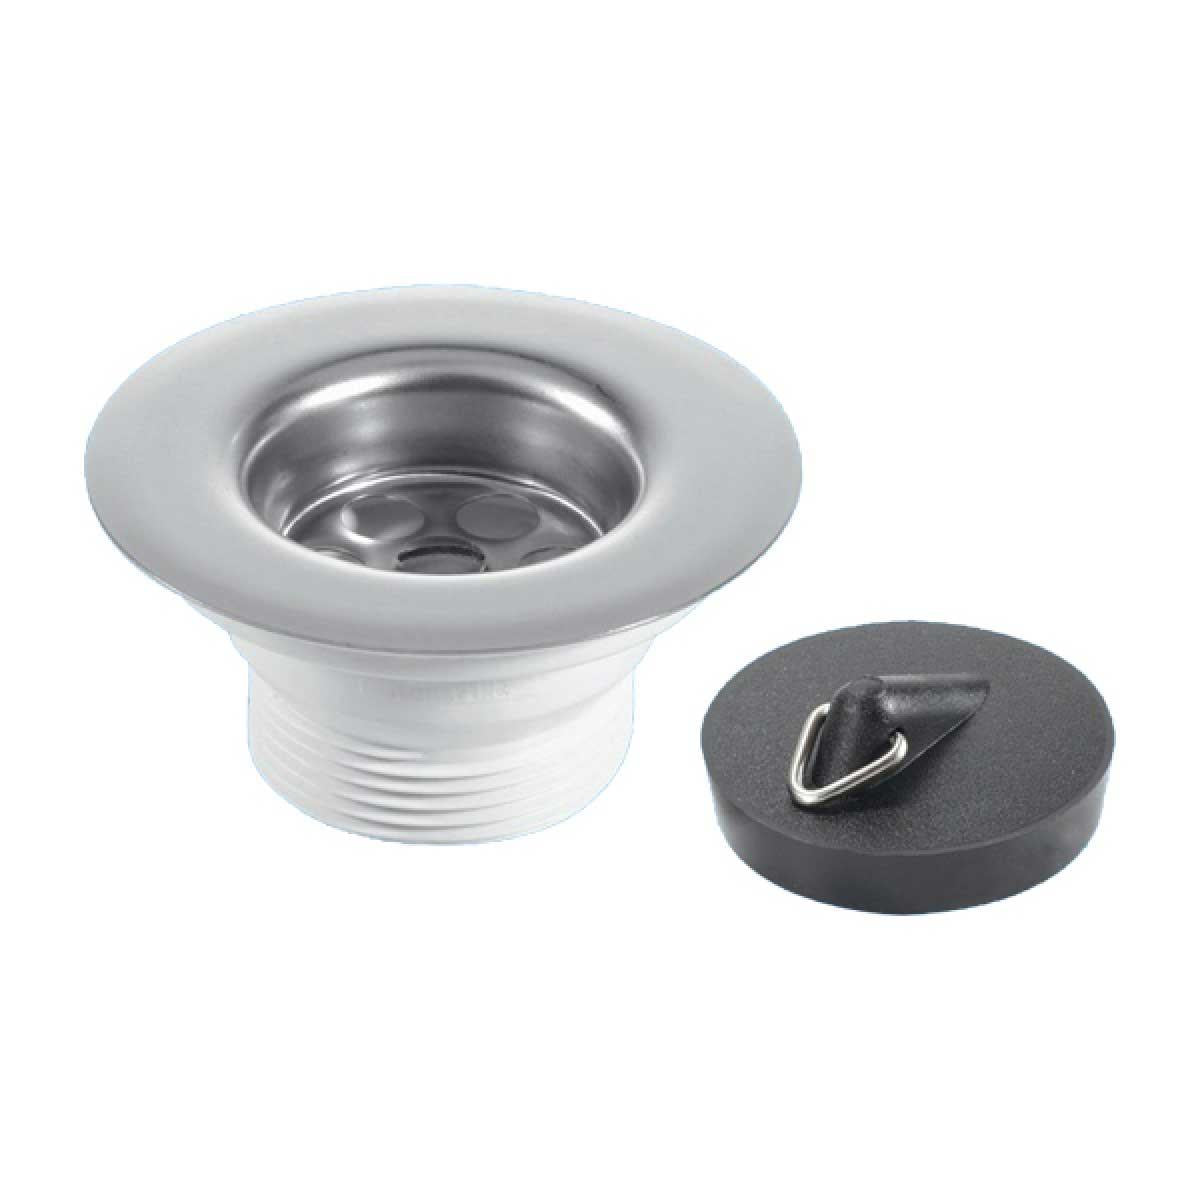 BSW6P McAlpine Sink Waste 1.5" x 85mm Centre Pin Stainless Steel Flange with Plug - plumbing4home